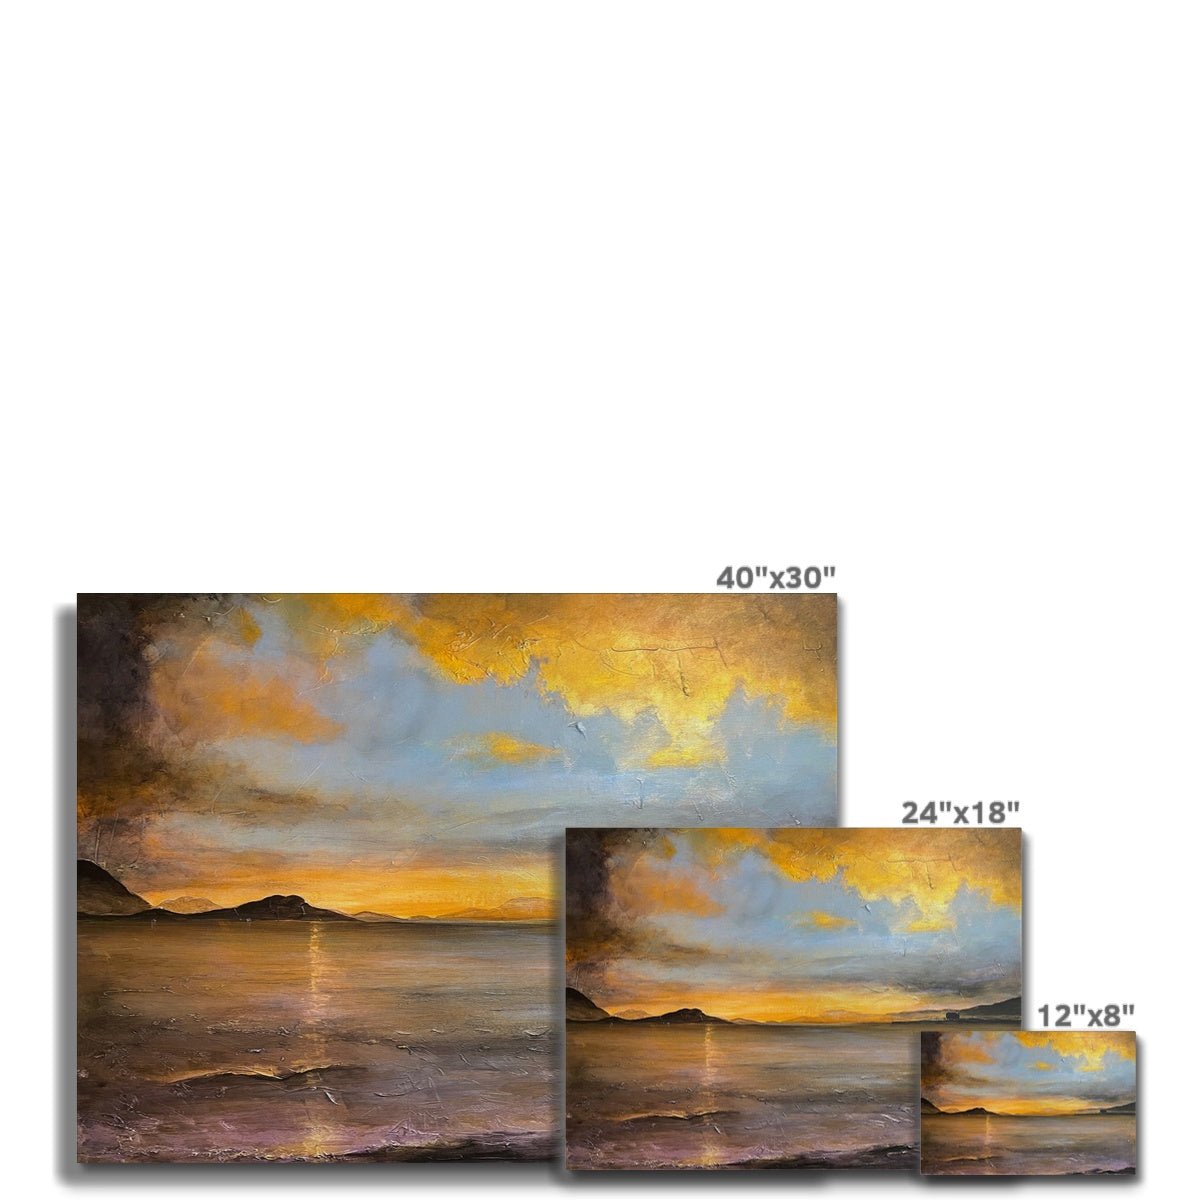 Loch Linnhe Sunset Painting | Canvas From Scotland-Contemporary Stretched Canvas Prints-Scottish Lochs & Mountains Art Gallery-Paintings, Prints, Homeware, Art Gifts From Scotland By Scottish Artist Kevin Hunter